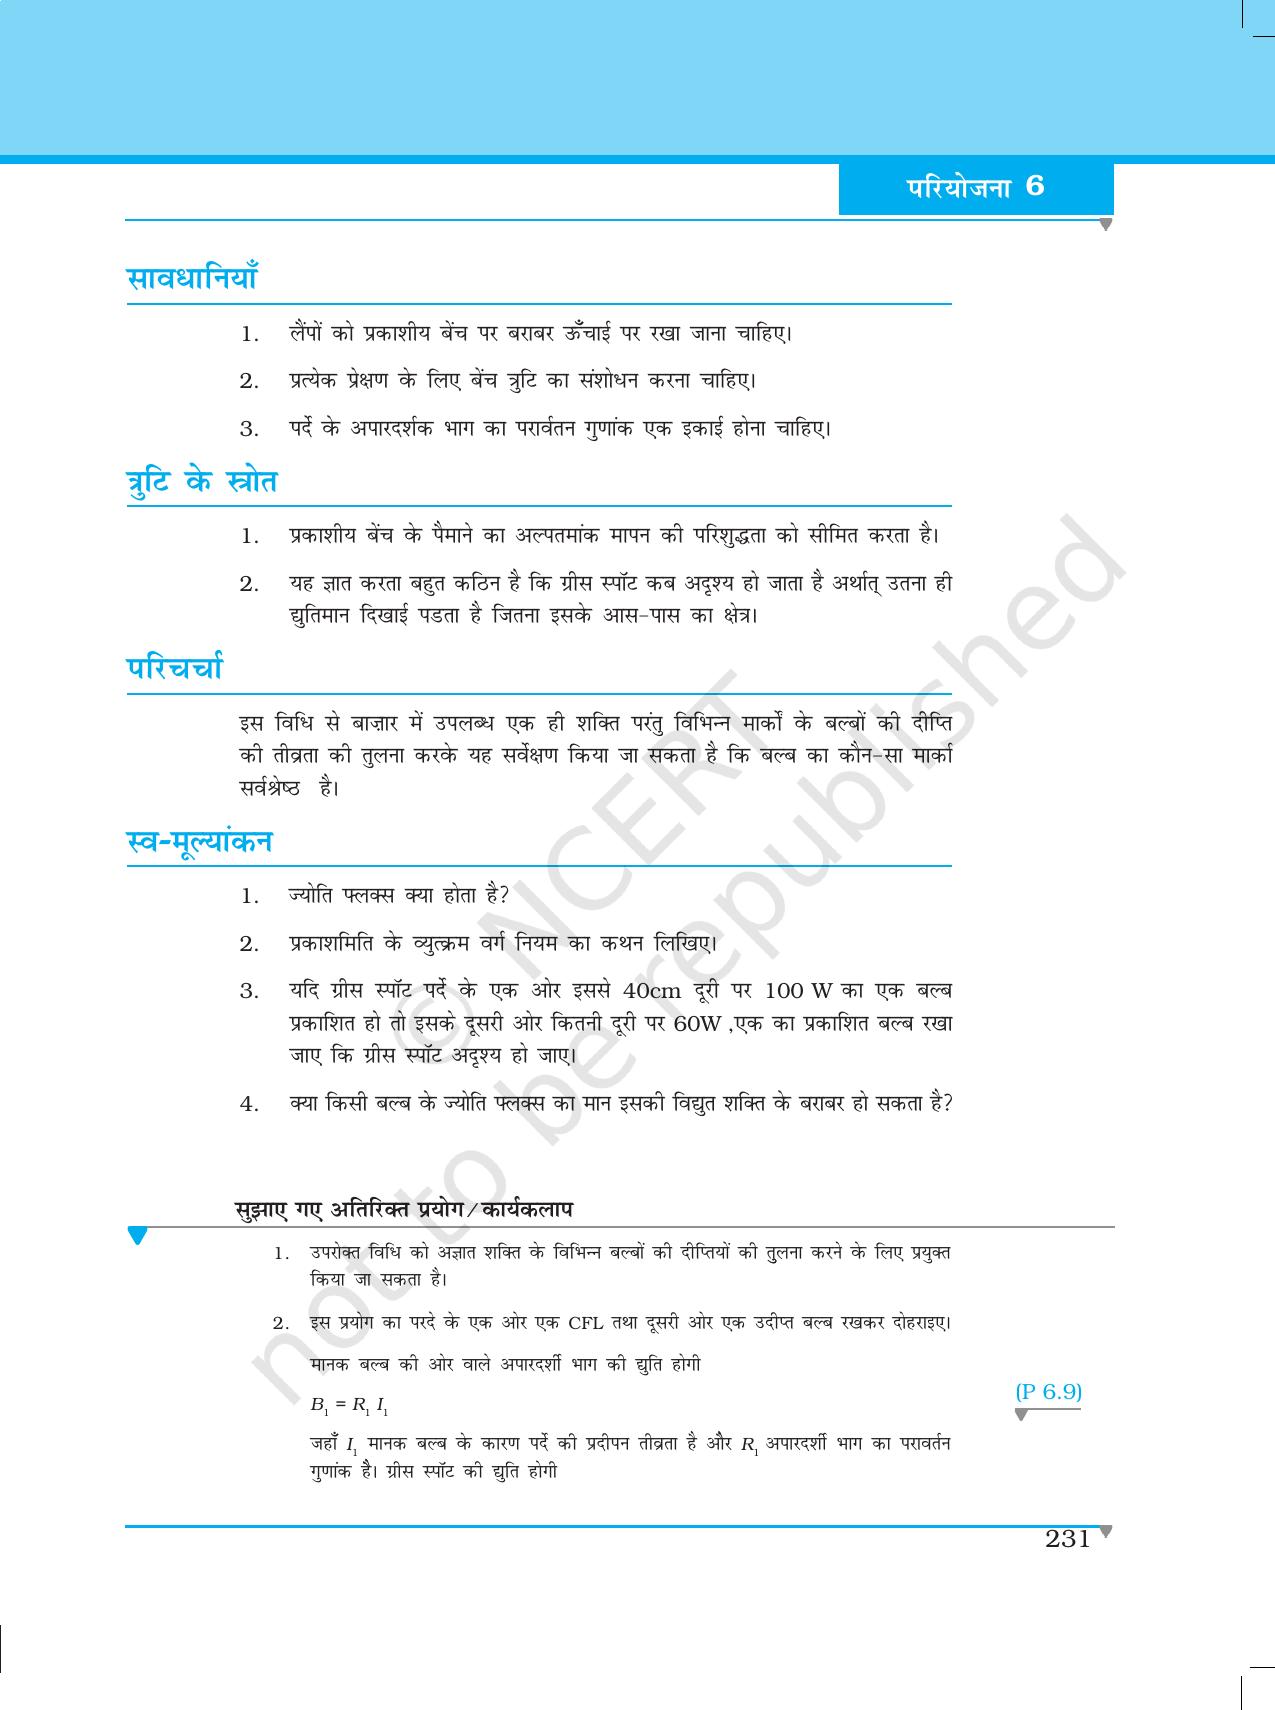 NCERT Laboratory Manuals for Class XII भौतिकी - परियोजना (1 - 7) - Page 25